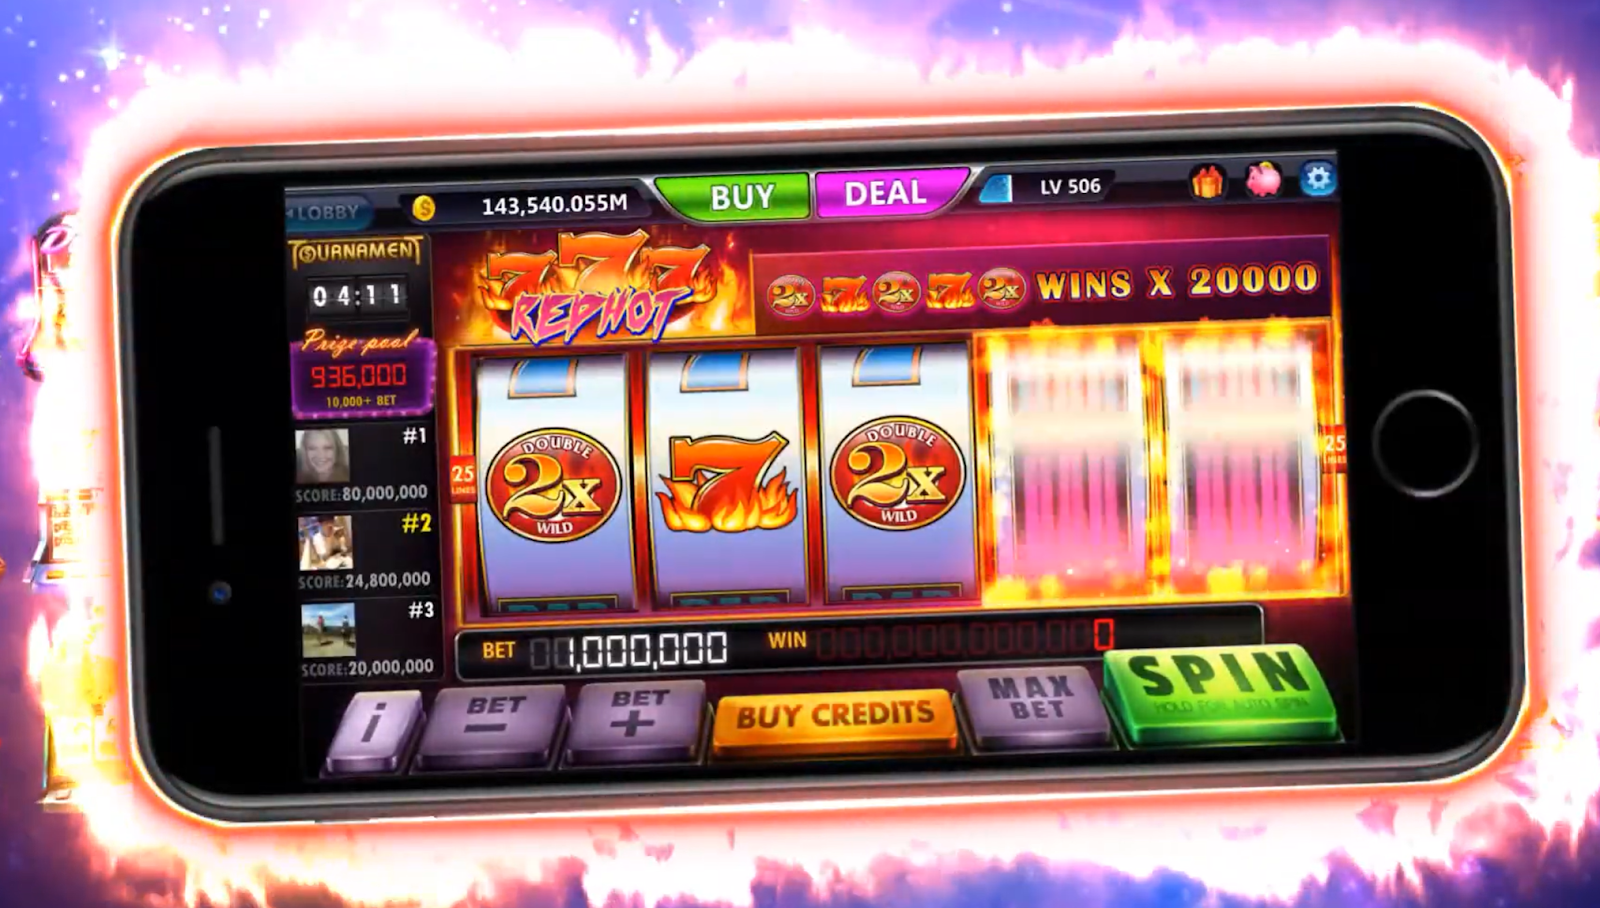 Mobile Slots Deposit By Phone Bill– Try It Out Now And Keep What You Win. Gambling